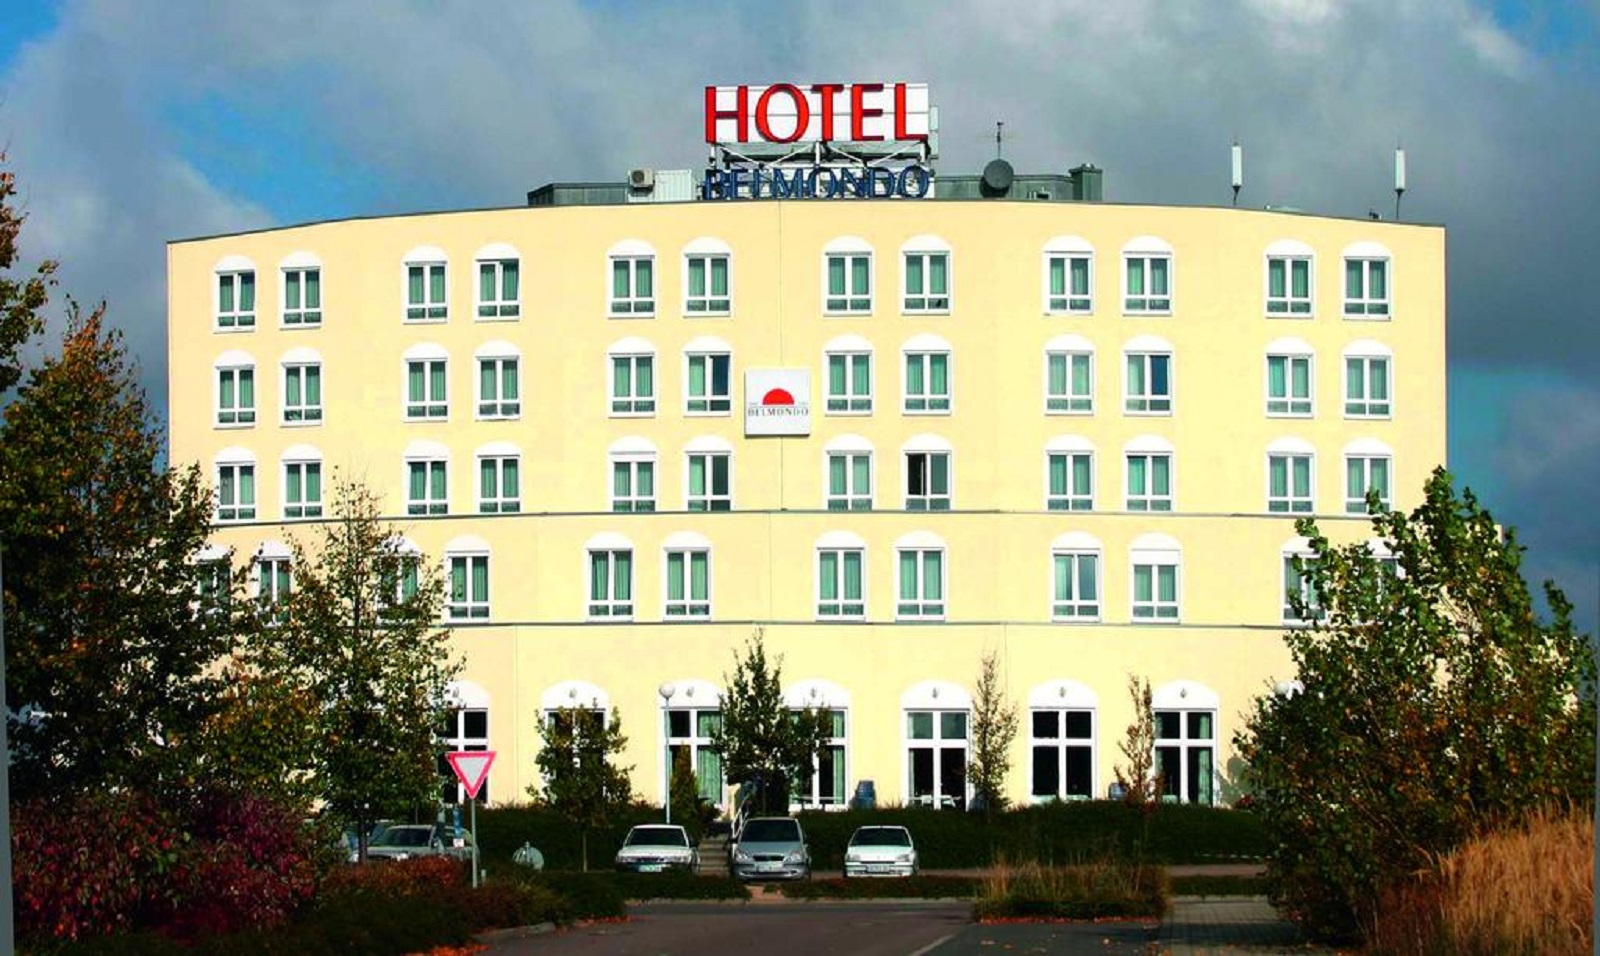 H&S Hotel Belmondo Leipzig Airport <br/>84.00 ew <br/> <a href='http://vakantieoplossing.nl/outpage/?id=a3042138b68e68e207368cc28f834b15' target='_blank'>View Details</a>